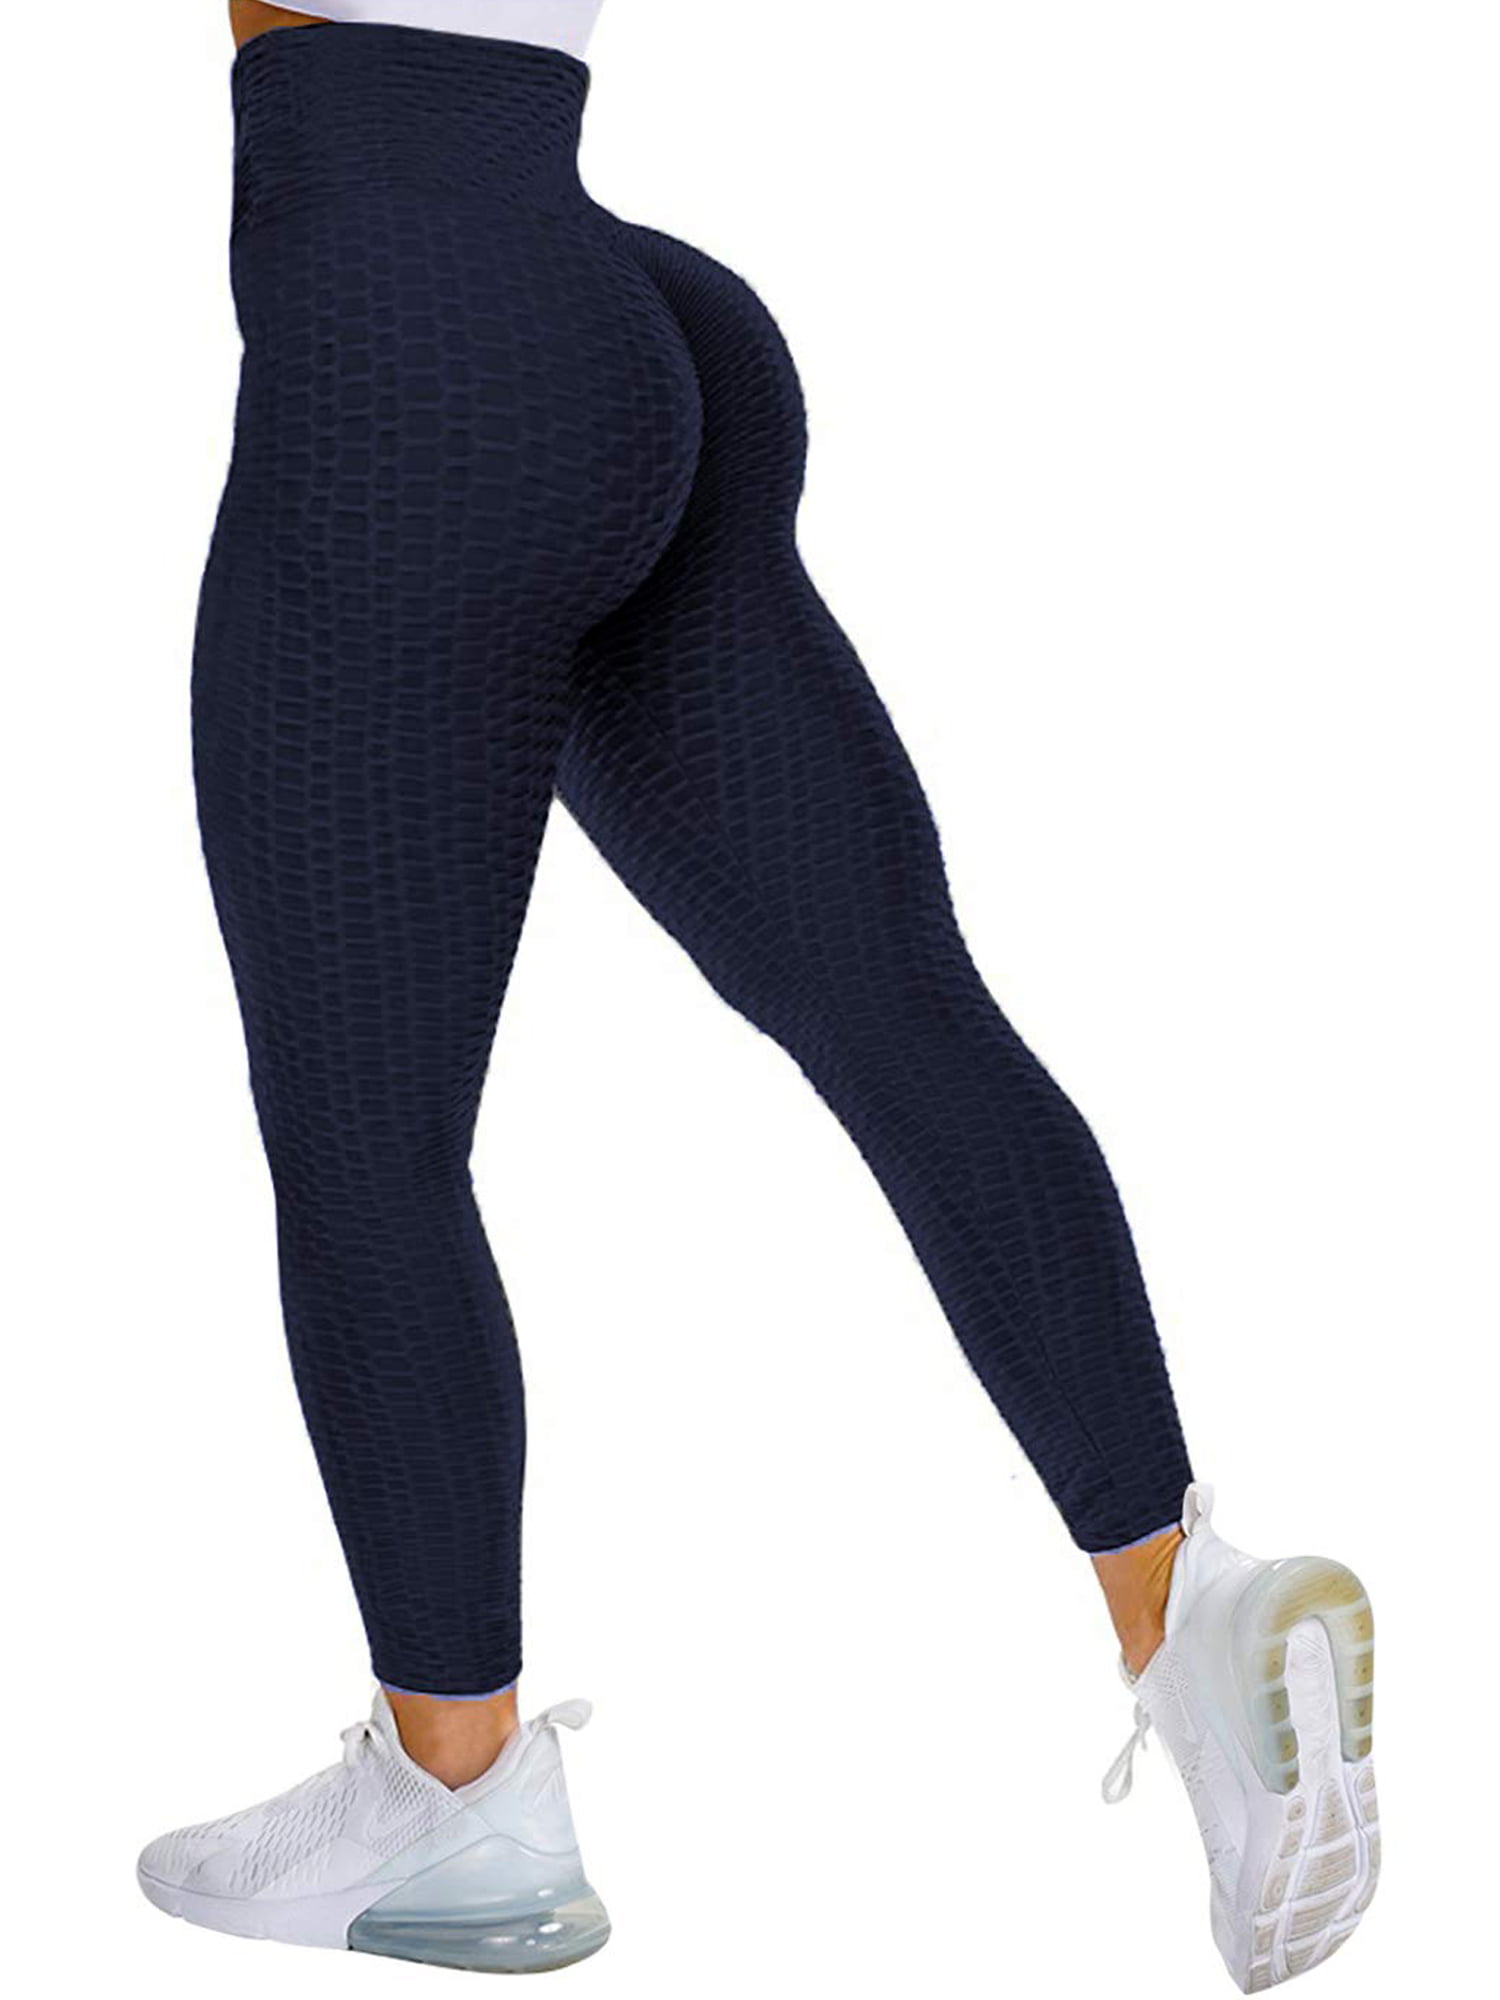 Fast Delivery! TikTok Scrunch Booty Ruched Bum Leggings For Women Elastic  Jaquard Textured Yoga Pants For Fitness And Workout Plus Size Black Fitness  Pants From Hot Wind, $12.72